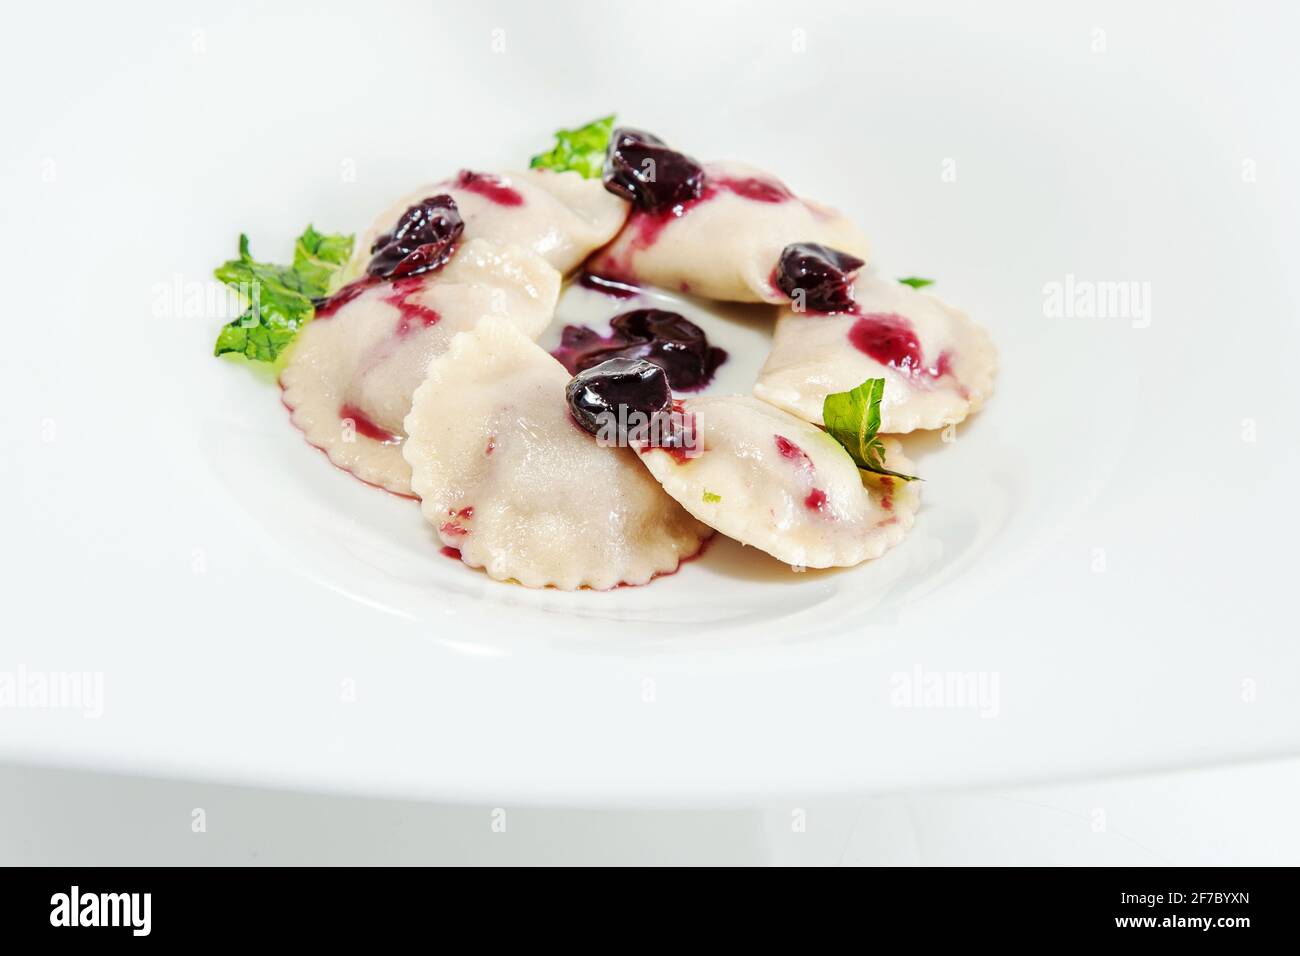 Ravioli stuffed with cheese fondue and served with stewed grapes, Lazio, Italy, Europe Stock Photo